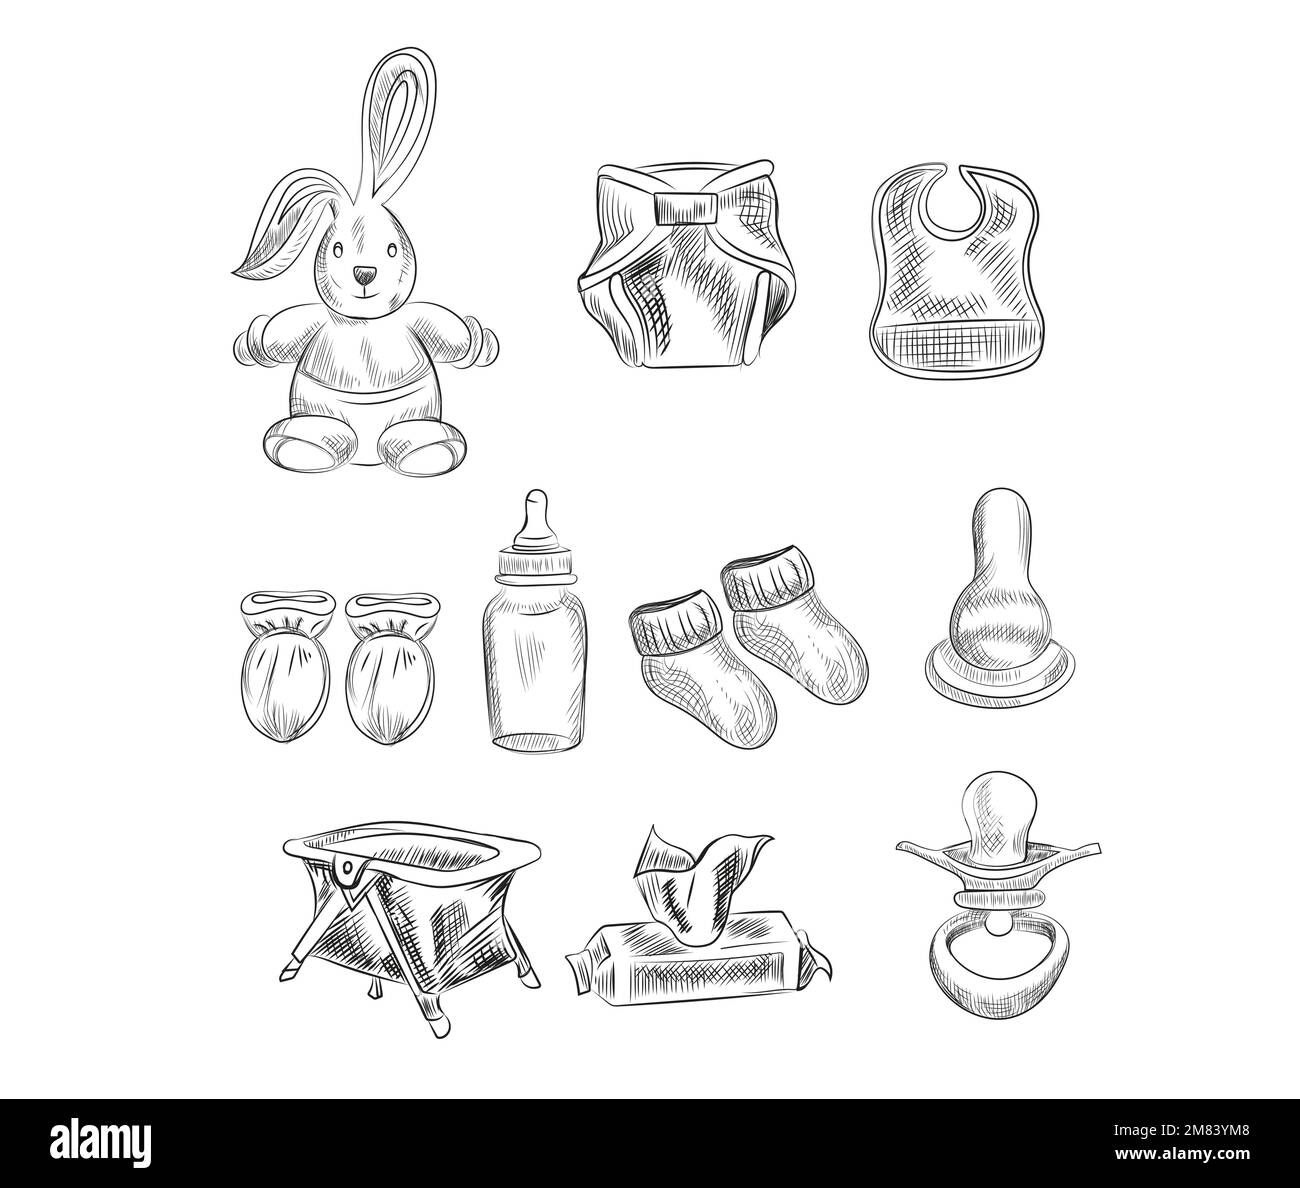 Hand-drawn sketch set of baby and infant items. vector illustration  Pacifier, diapers, baby feeding bib, knitted baby on white background Stock Vector